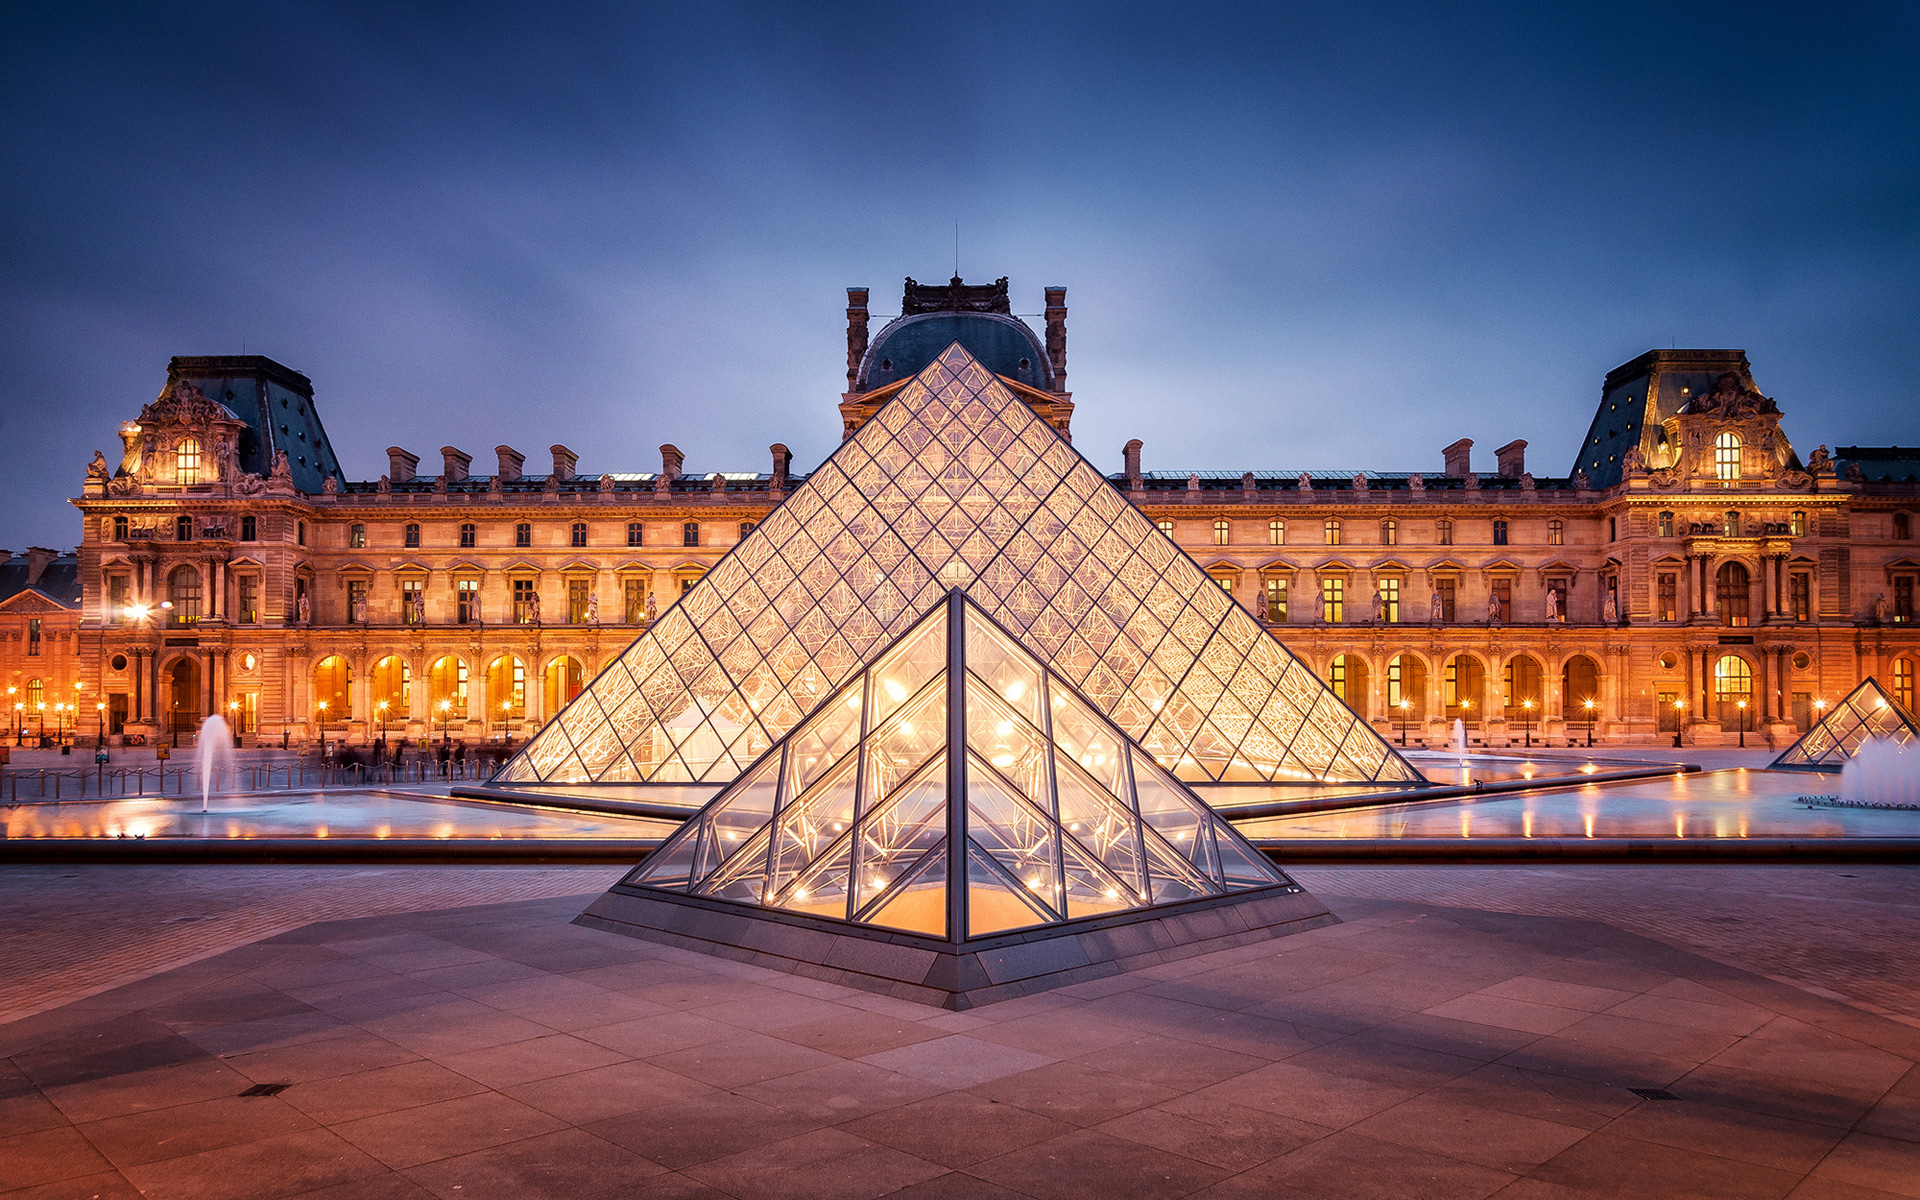 Discover Or Rediscover The Magic Of Louvre During Winter